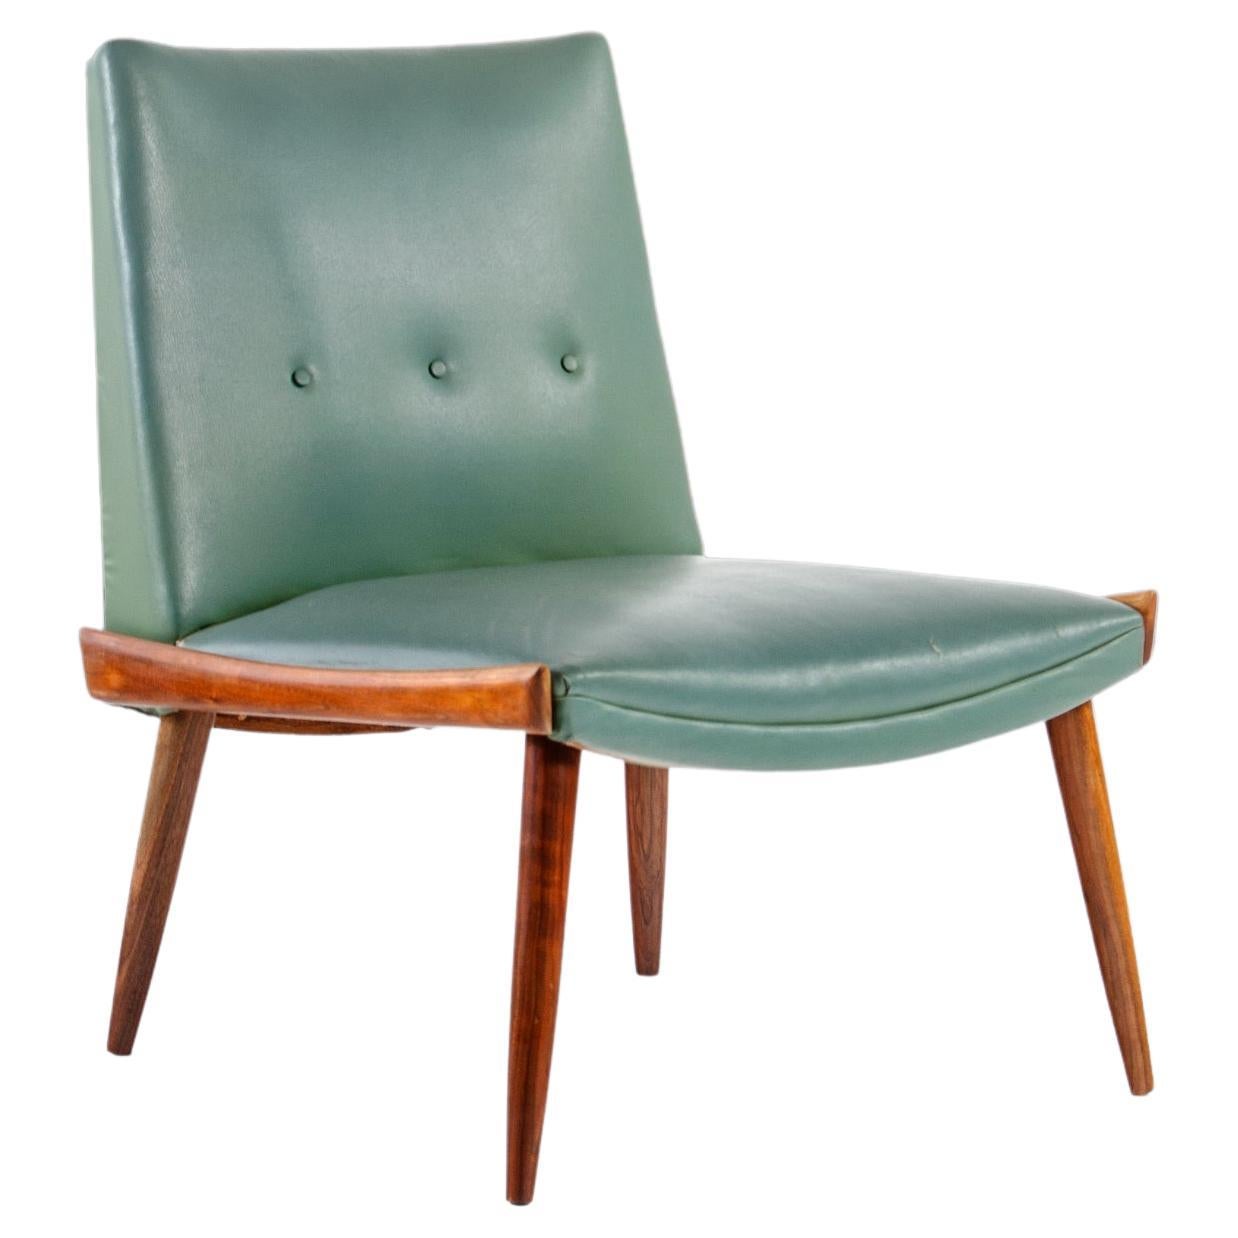 MCM Slipper Chair in Walnut & Original Green Fabric by Kroehler, USA, c. 1960's For Sale